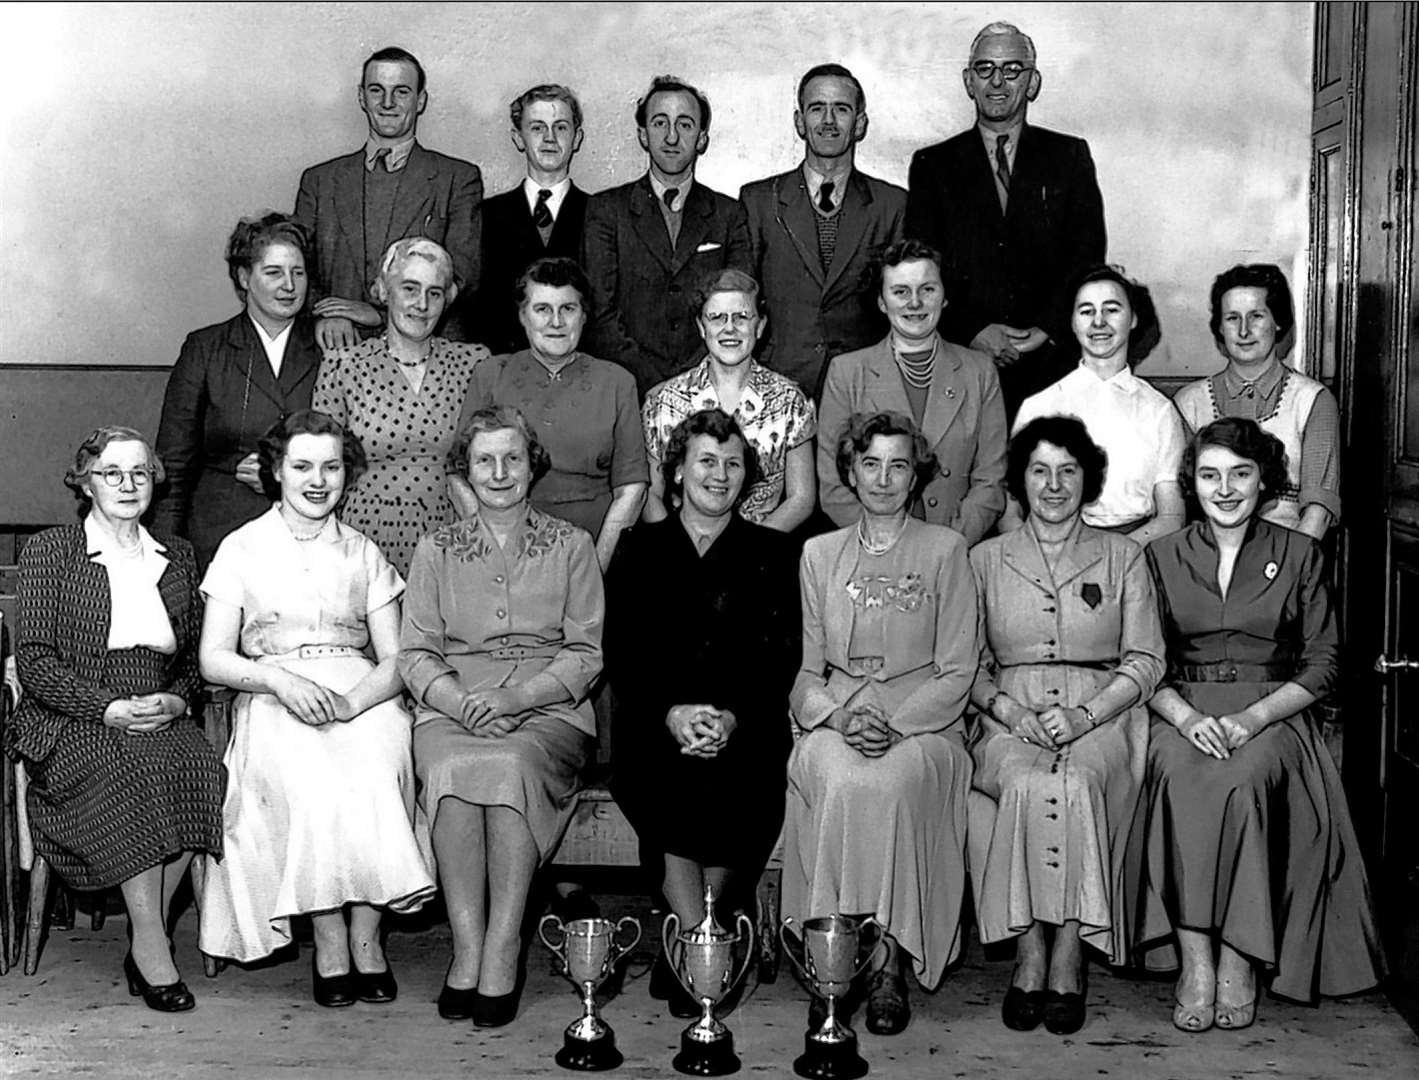 This is believed to be a group of Wick Choral Society members, probably from the late 1950s. The conductor was Mrs Kinghorn (front row, centre).